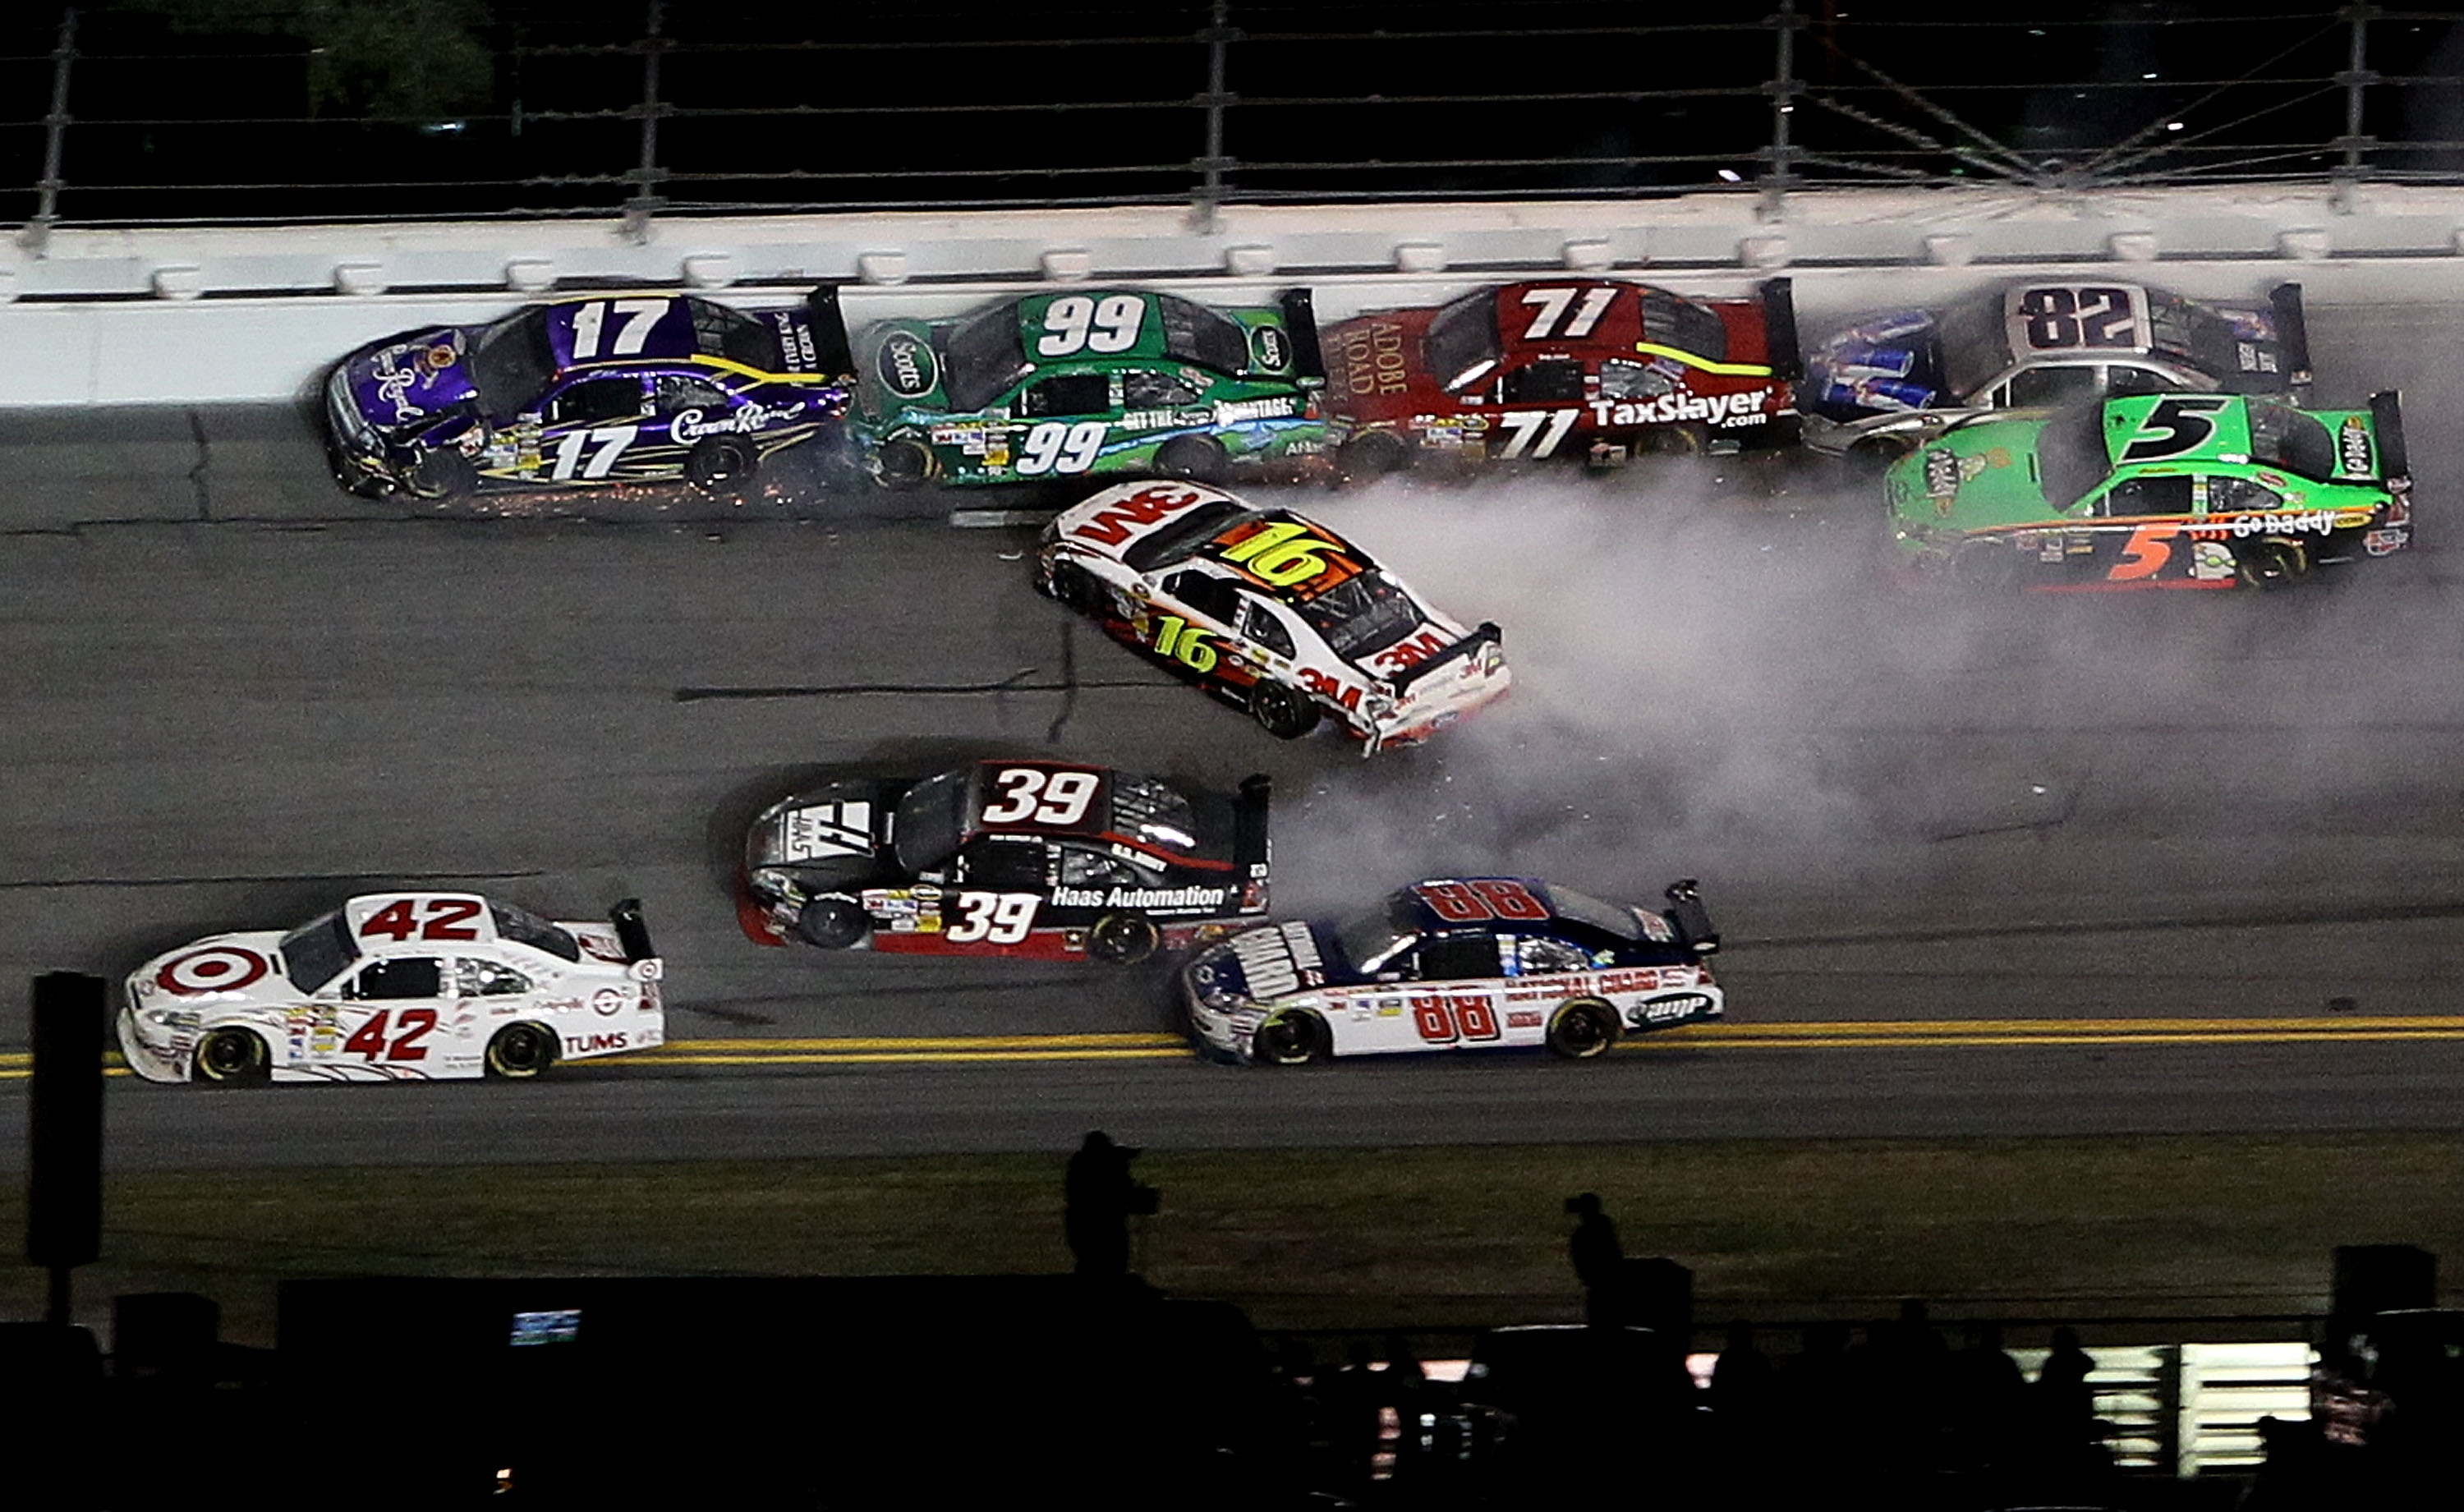 DAYTONA BEACH, FL - FEBRUARY 06: Greg Biffle, driver of the #16 3M Ford loses control in a multi car incident during the Budweiser Shootout at Daytona International Speedway on February 6, 2010 in Daytona Beach, Florida.  (Photo by Nick Laham/Getty Images